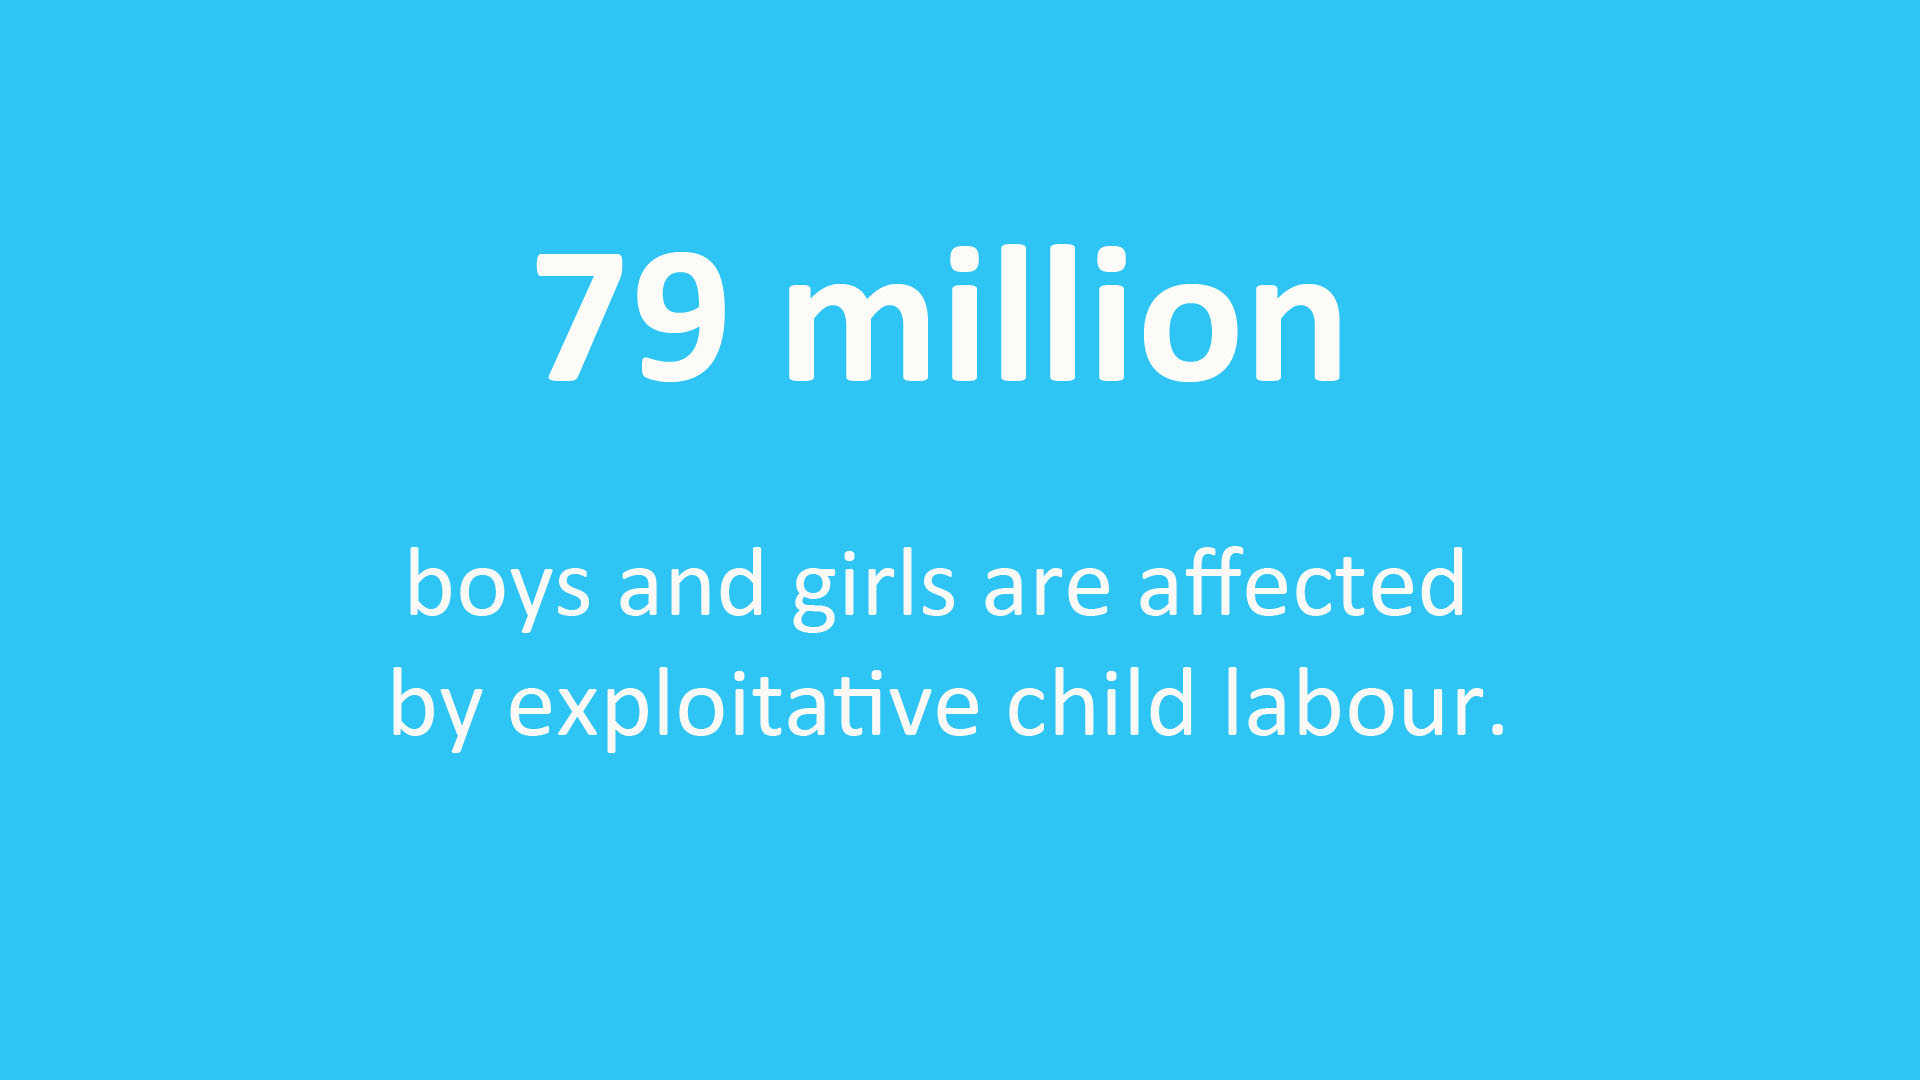 75 million boys and girls are affected by exploitative child labour.